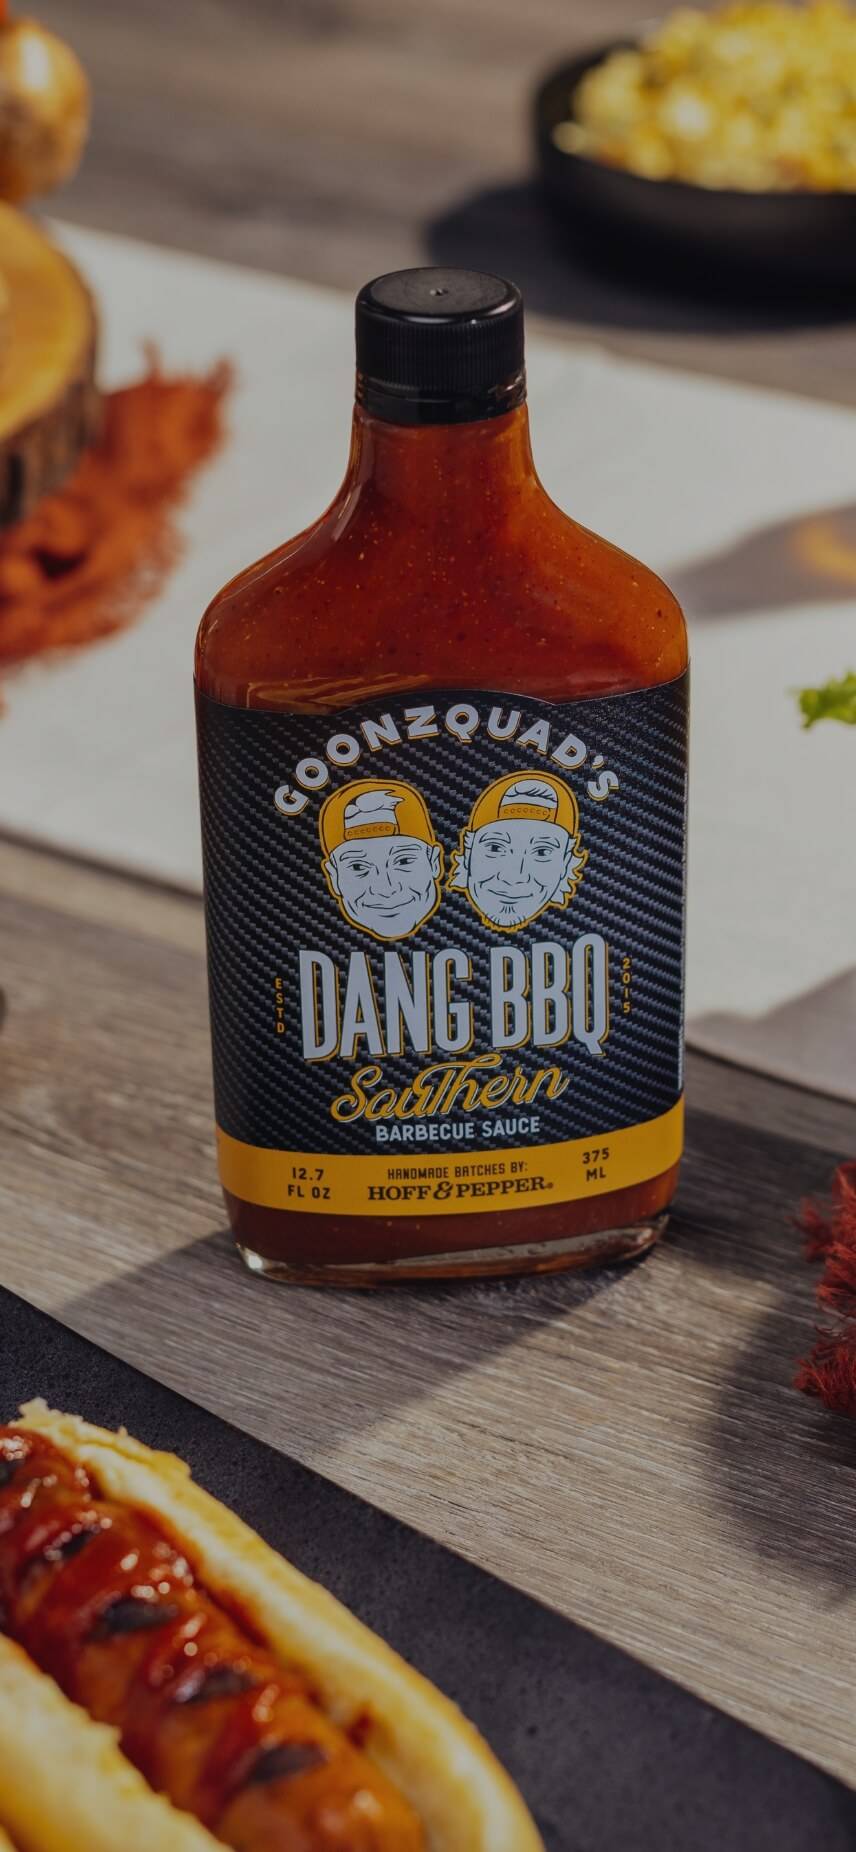 Bottle of Dang BBQ Sauce seating next to a plate of cheese burgers